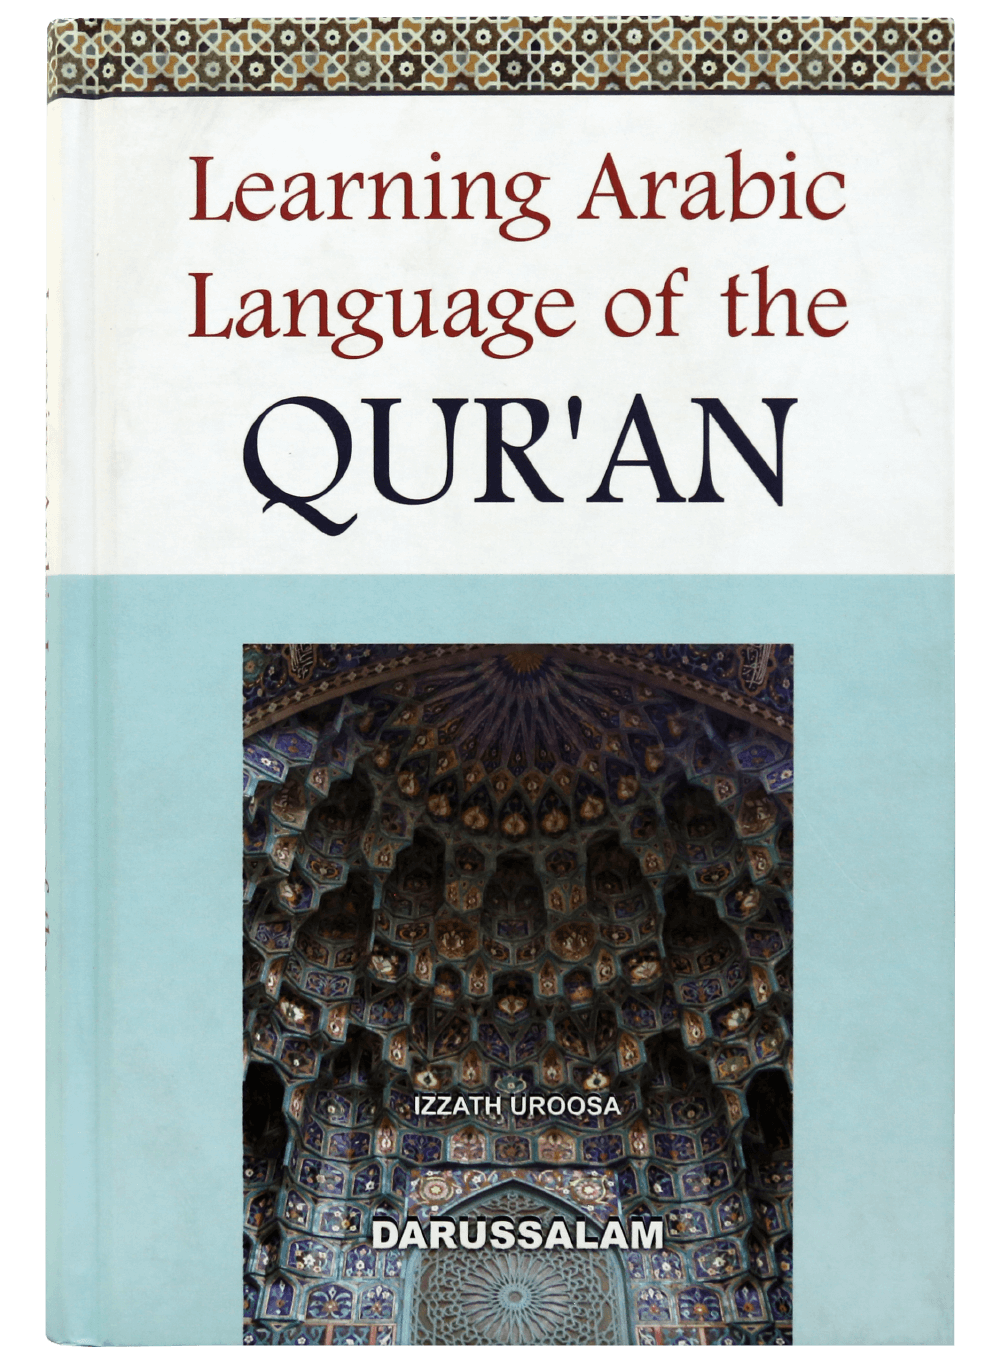 learning-arabic-language-of-the-quran-darussalam-20180405-105404